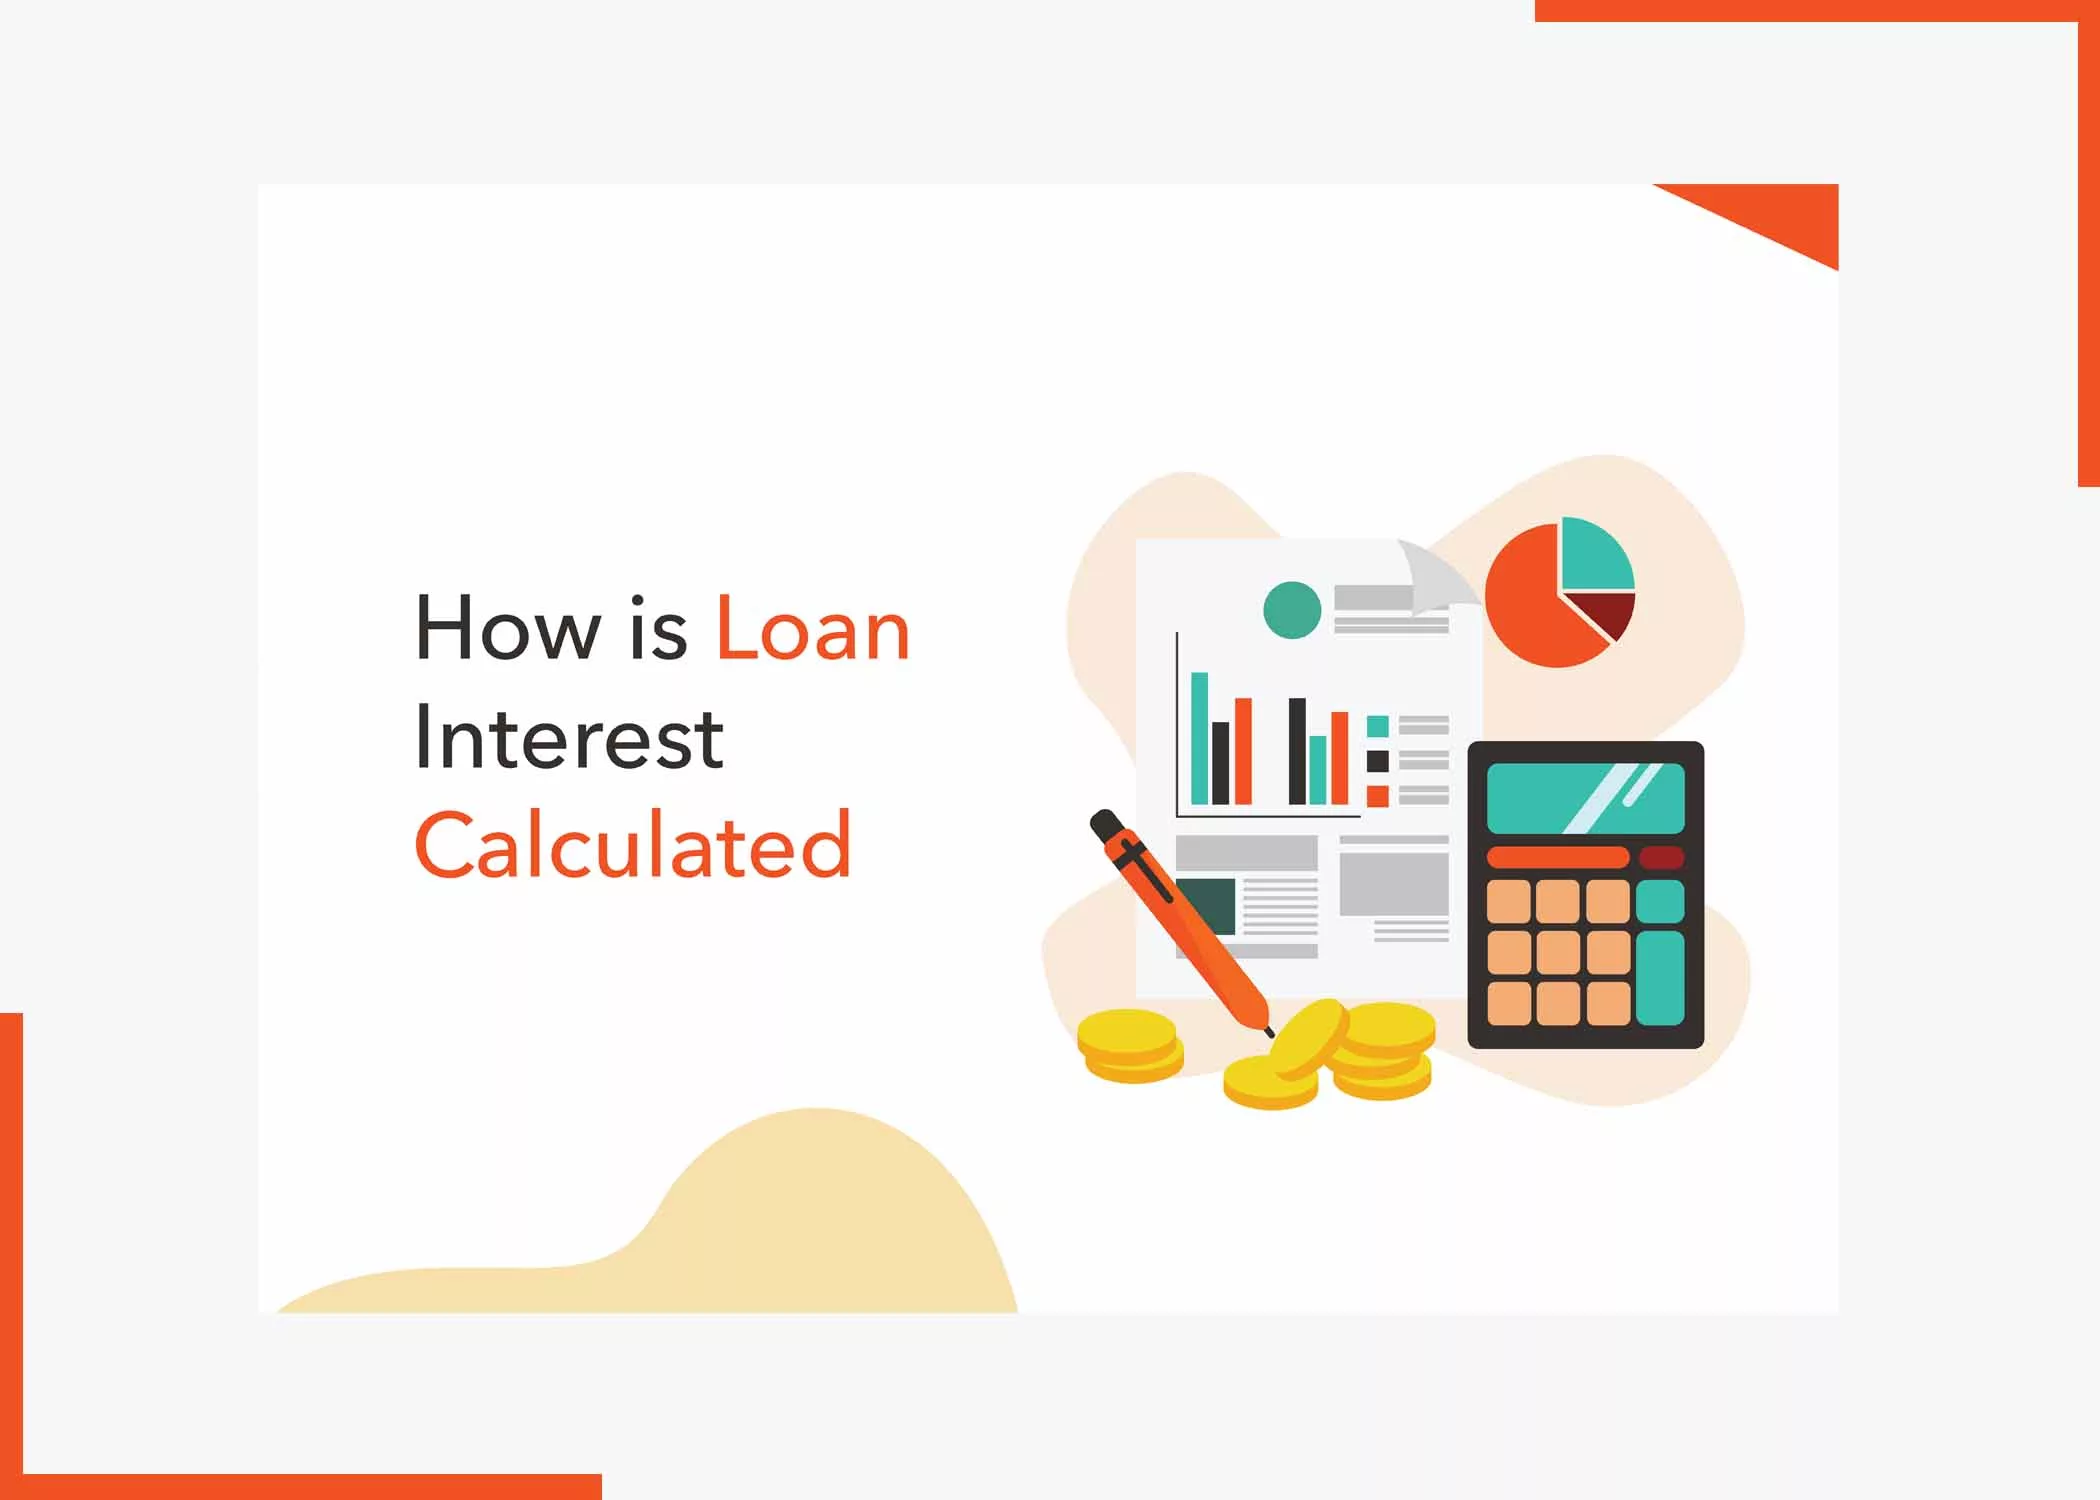 How is Loan Interest Calculated